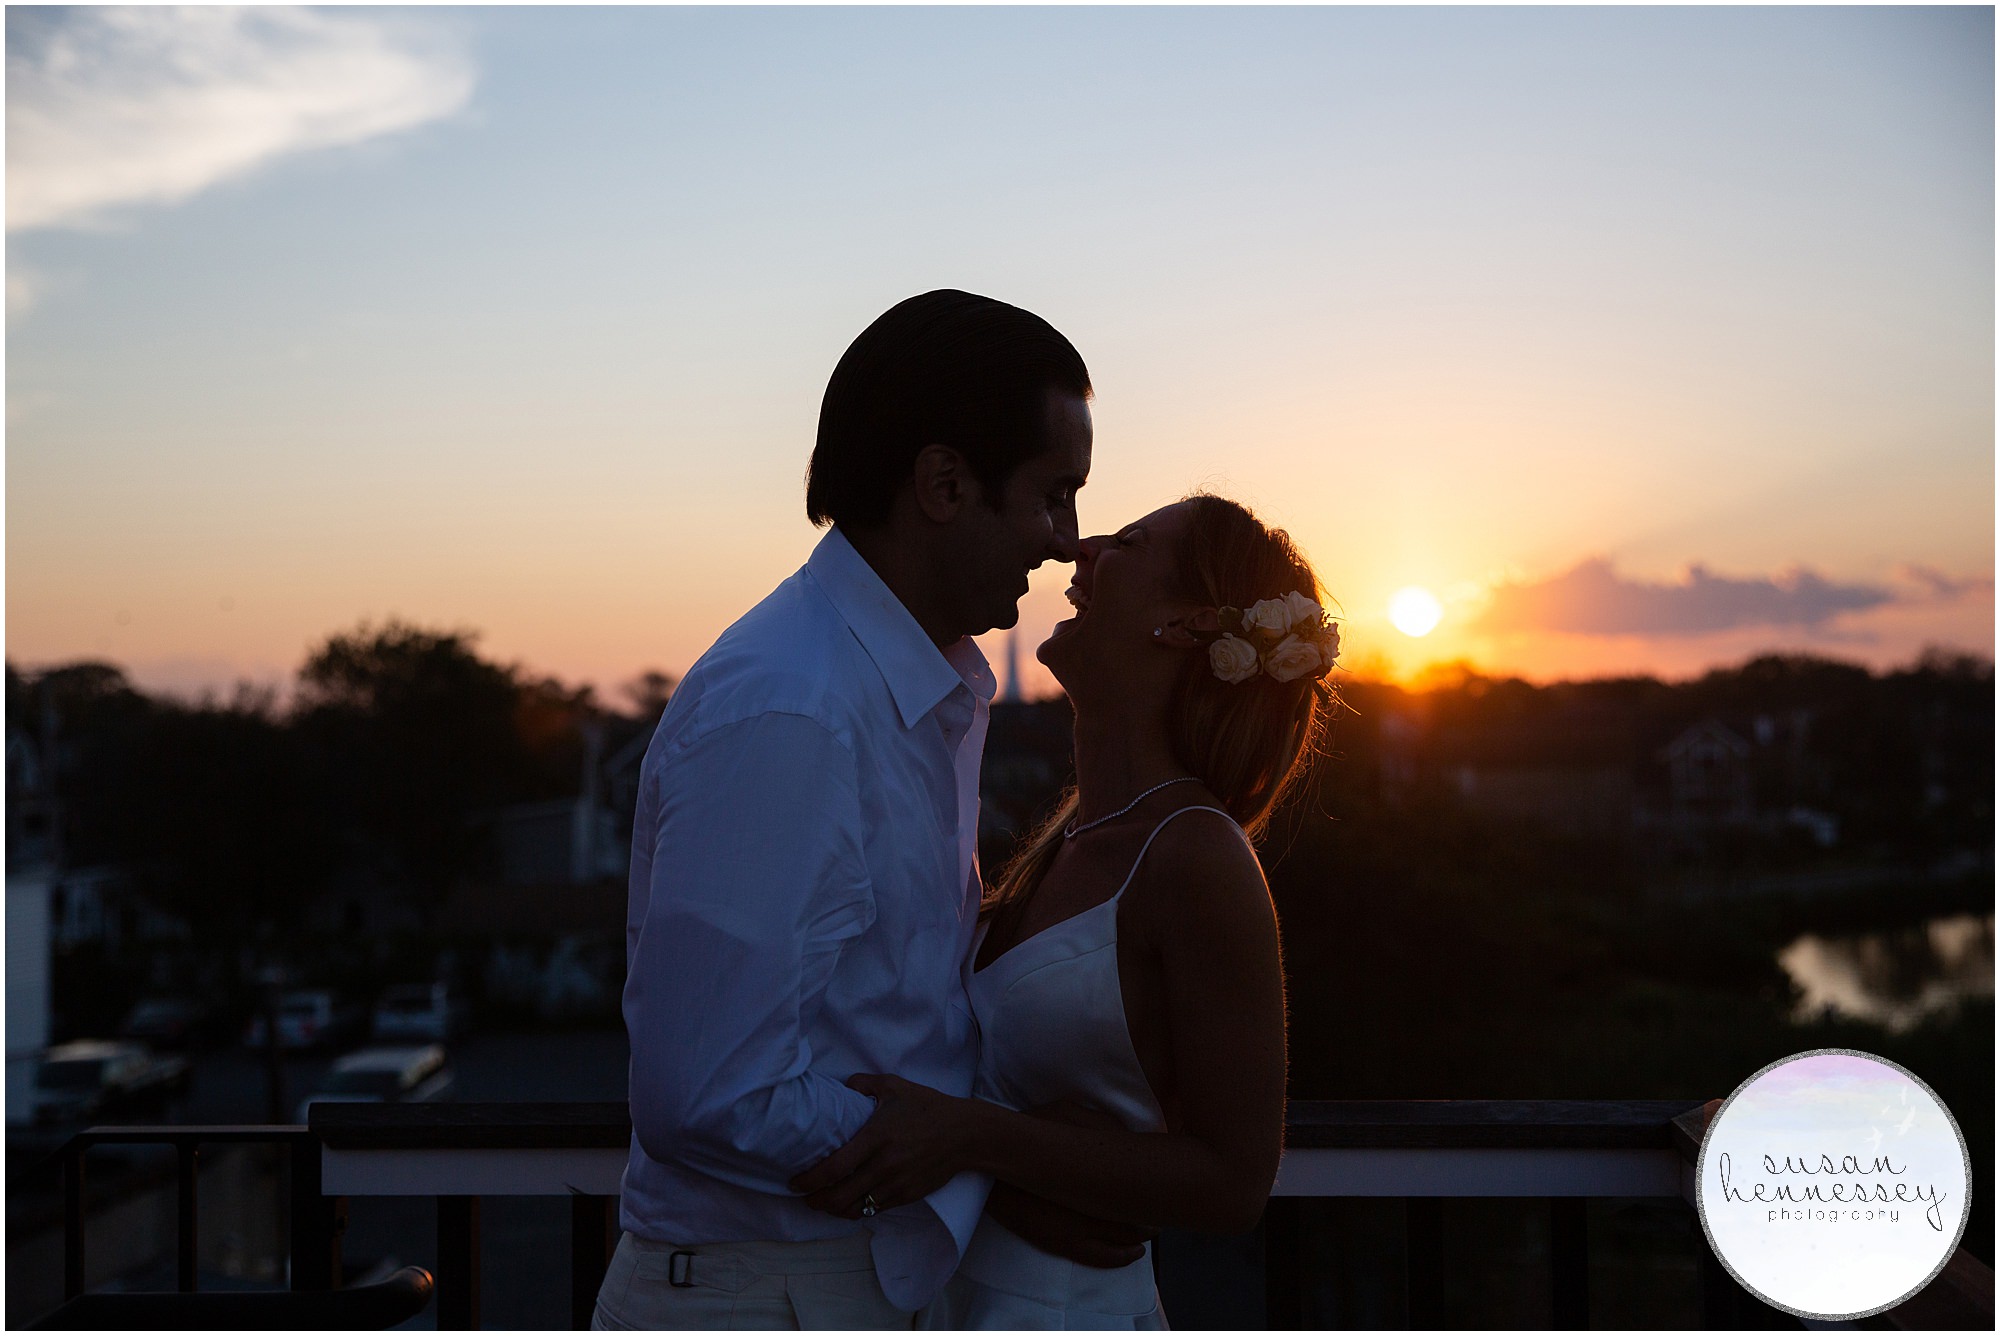 Susan Hennessey Photography Best of 2020 Weddings - Jersey Shore microwedding sunset photos